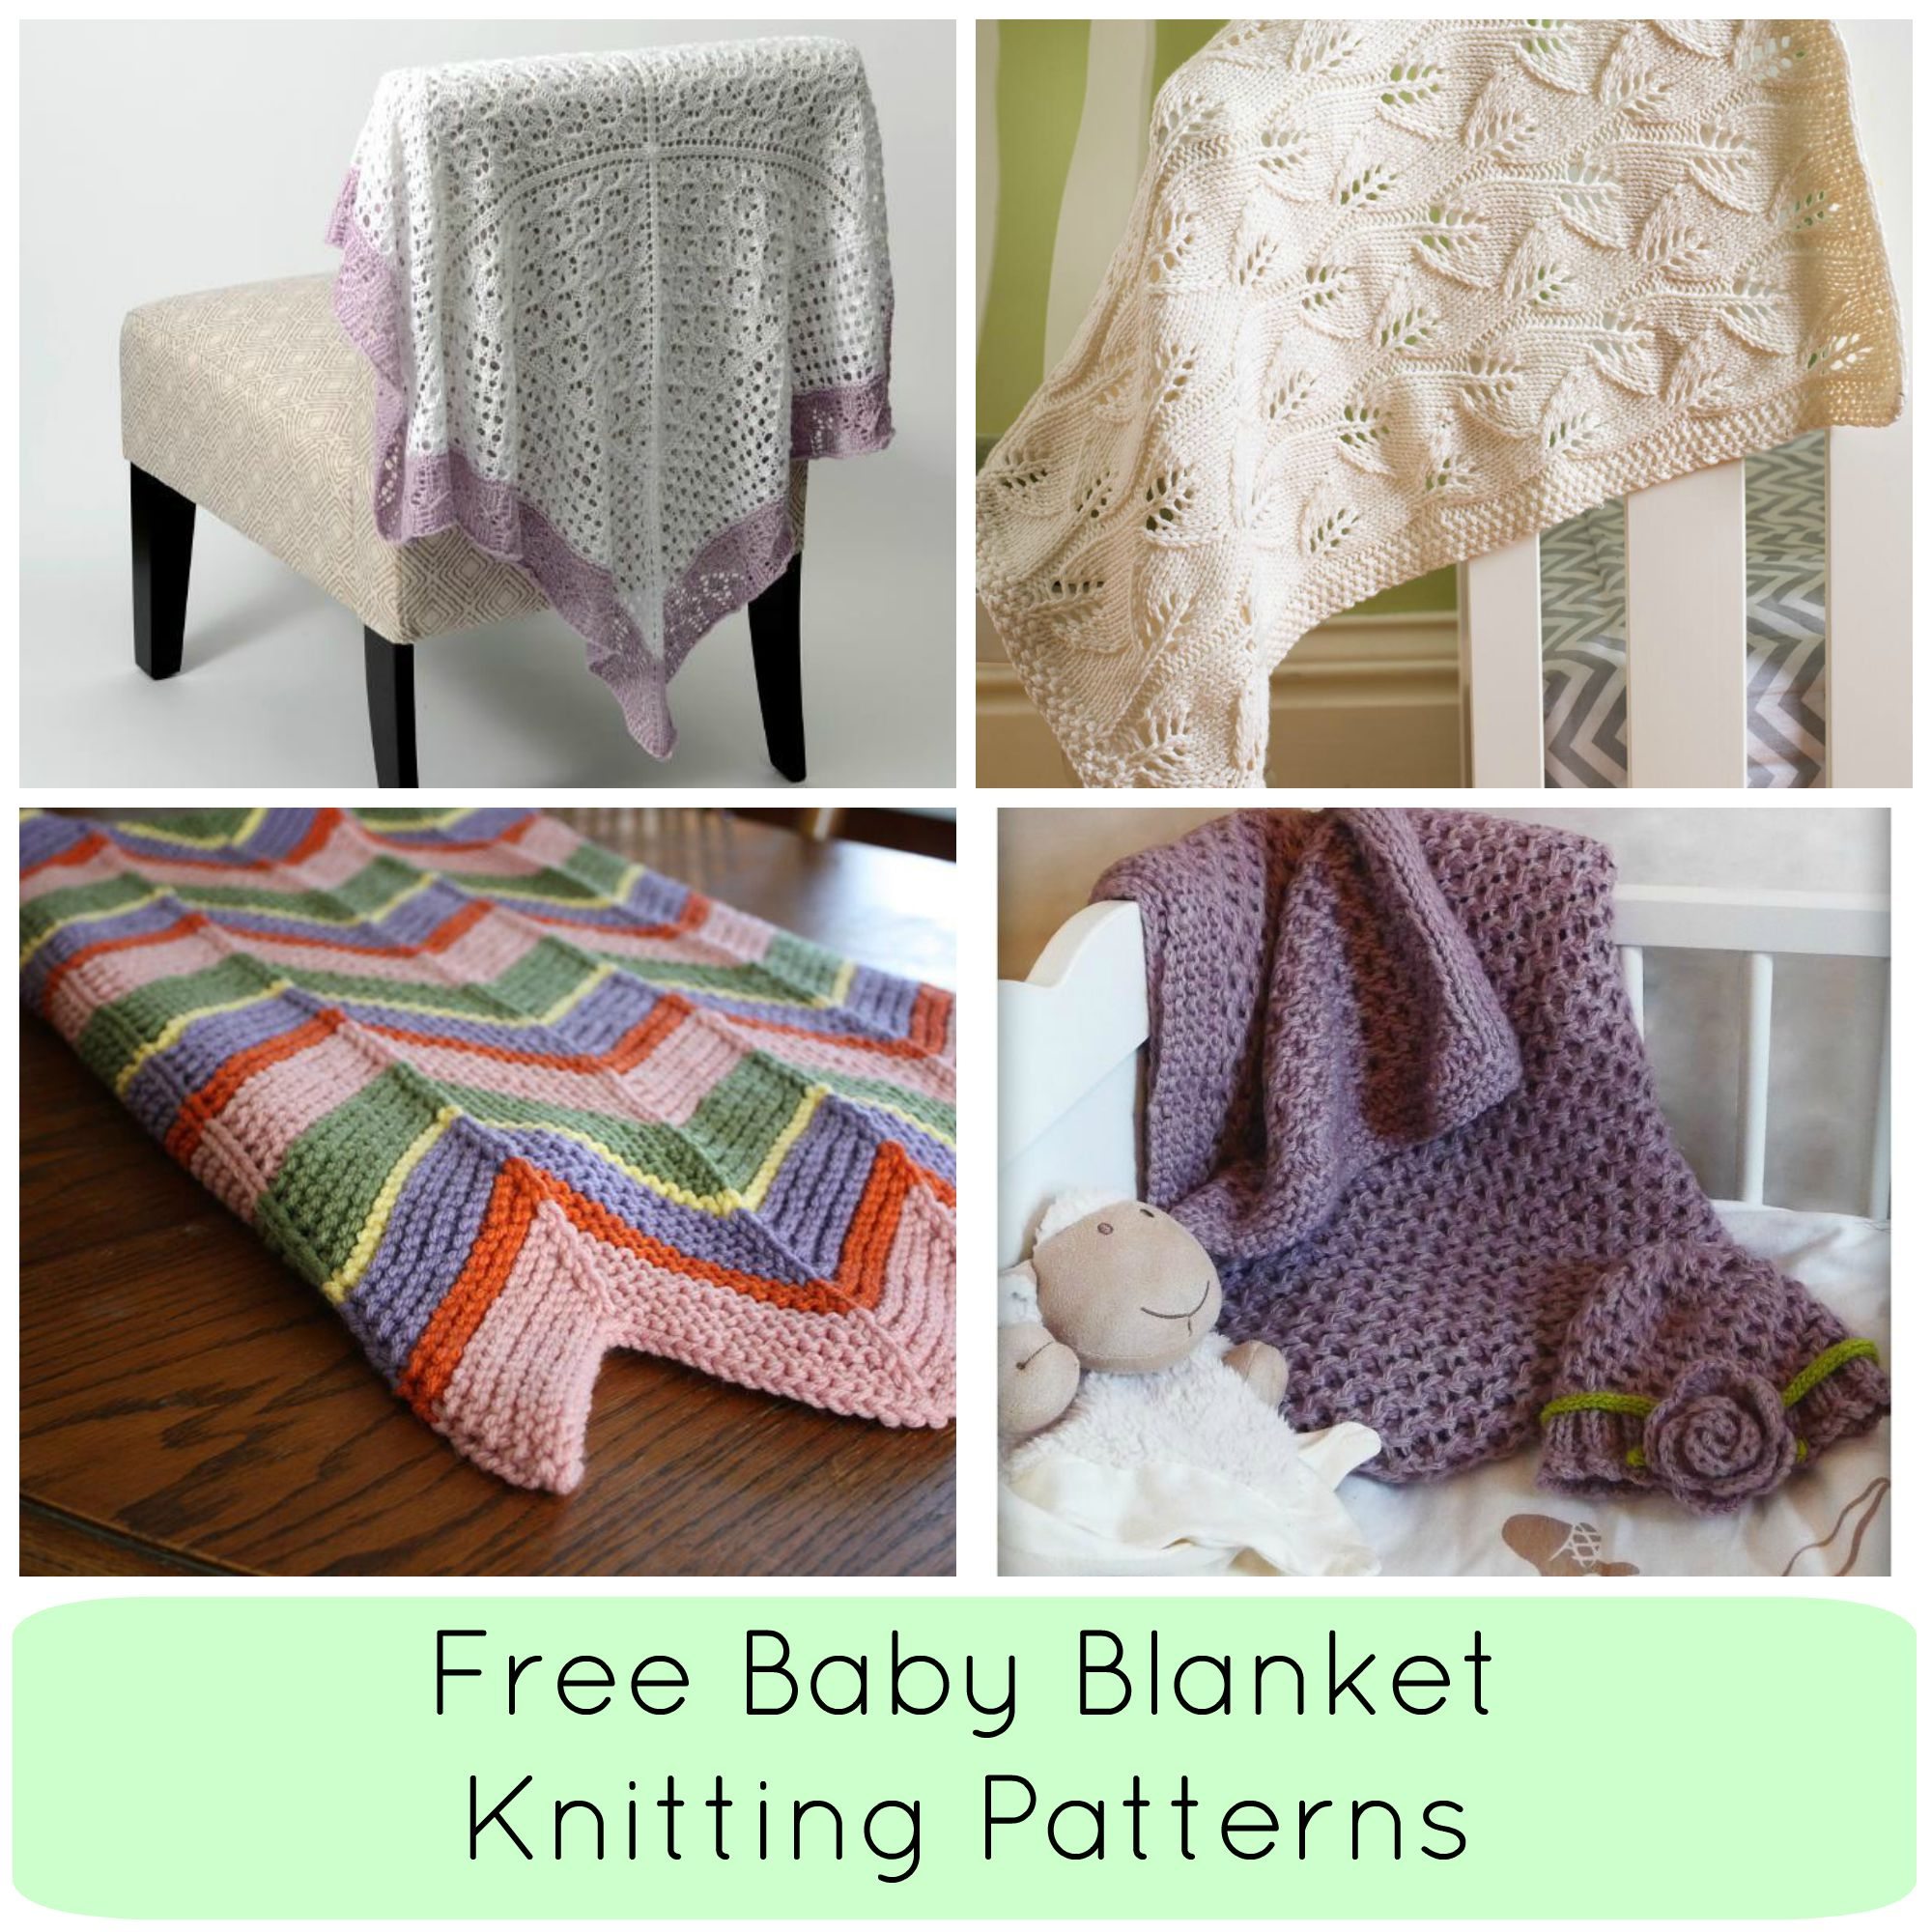 Free Knitting Patterns For Baby Blankets 8 Free Ba Blanket Knitting Patterns Craftsy